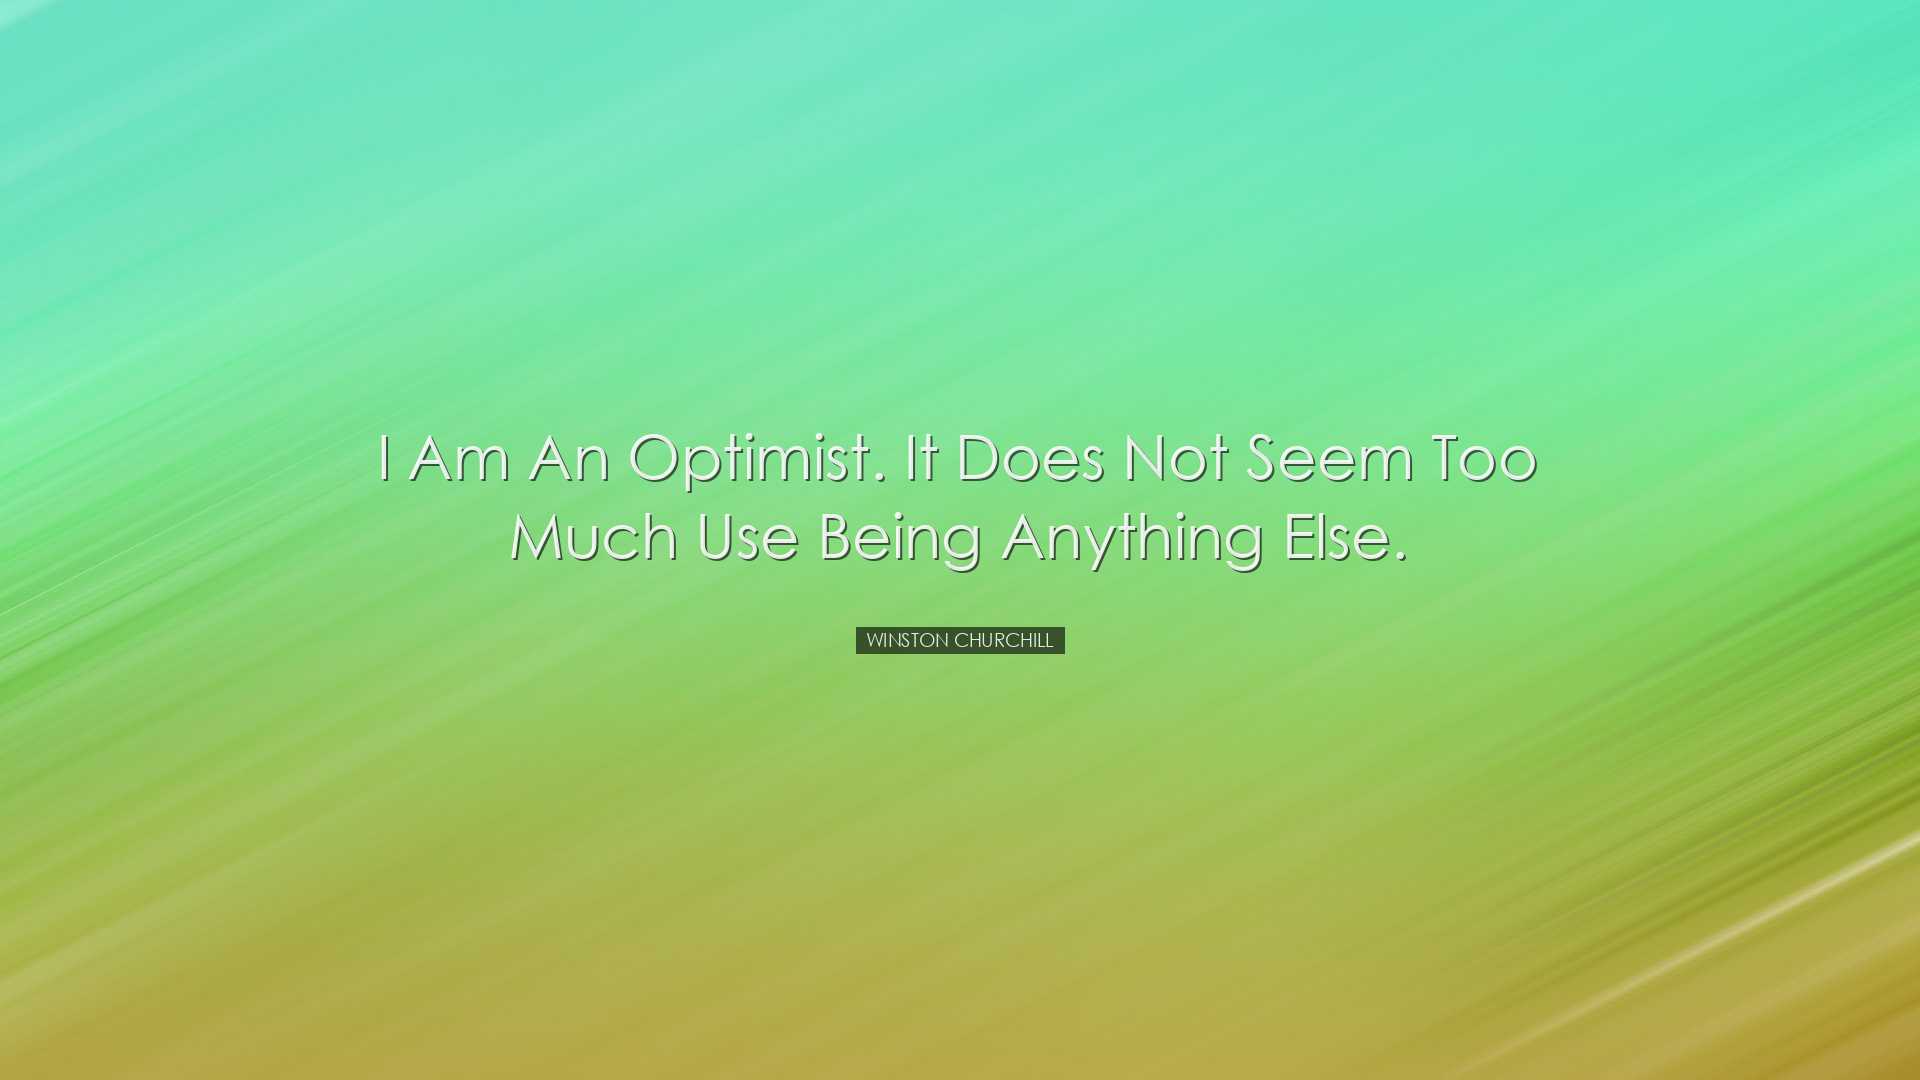 I am an optimist. It does not seem too much use being anything els